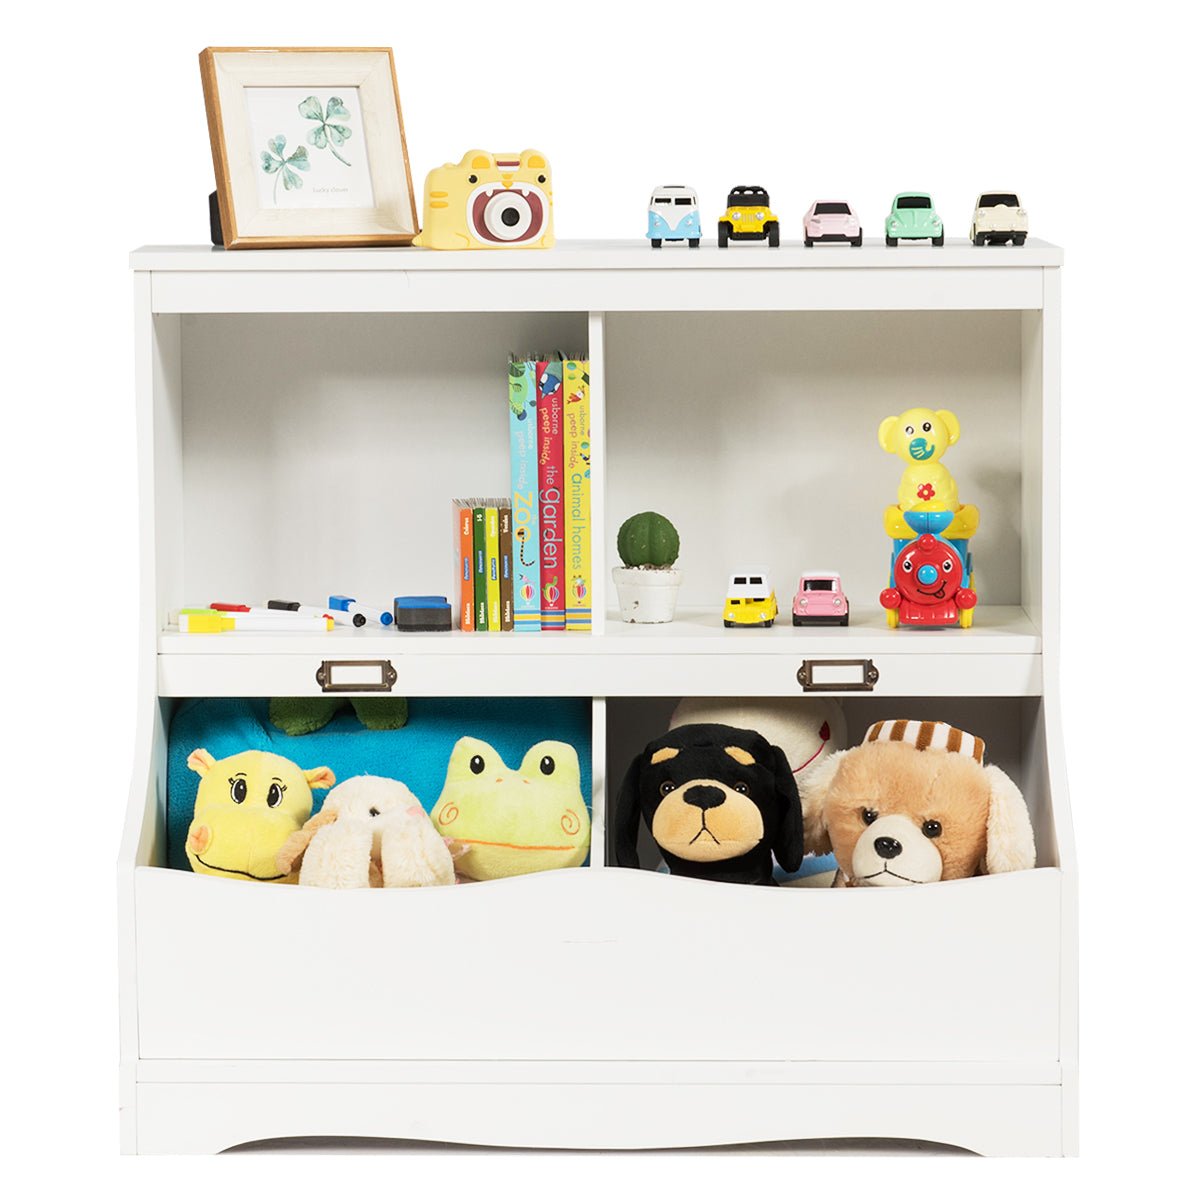 Kid's Room Storage Solution - 2 Tier Toy Shelf with Elegant Lacquered Surface